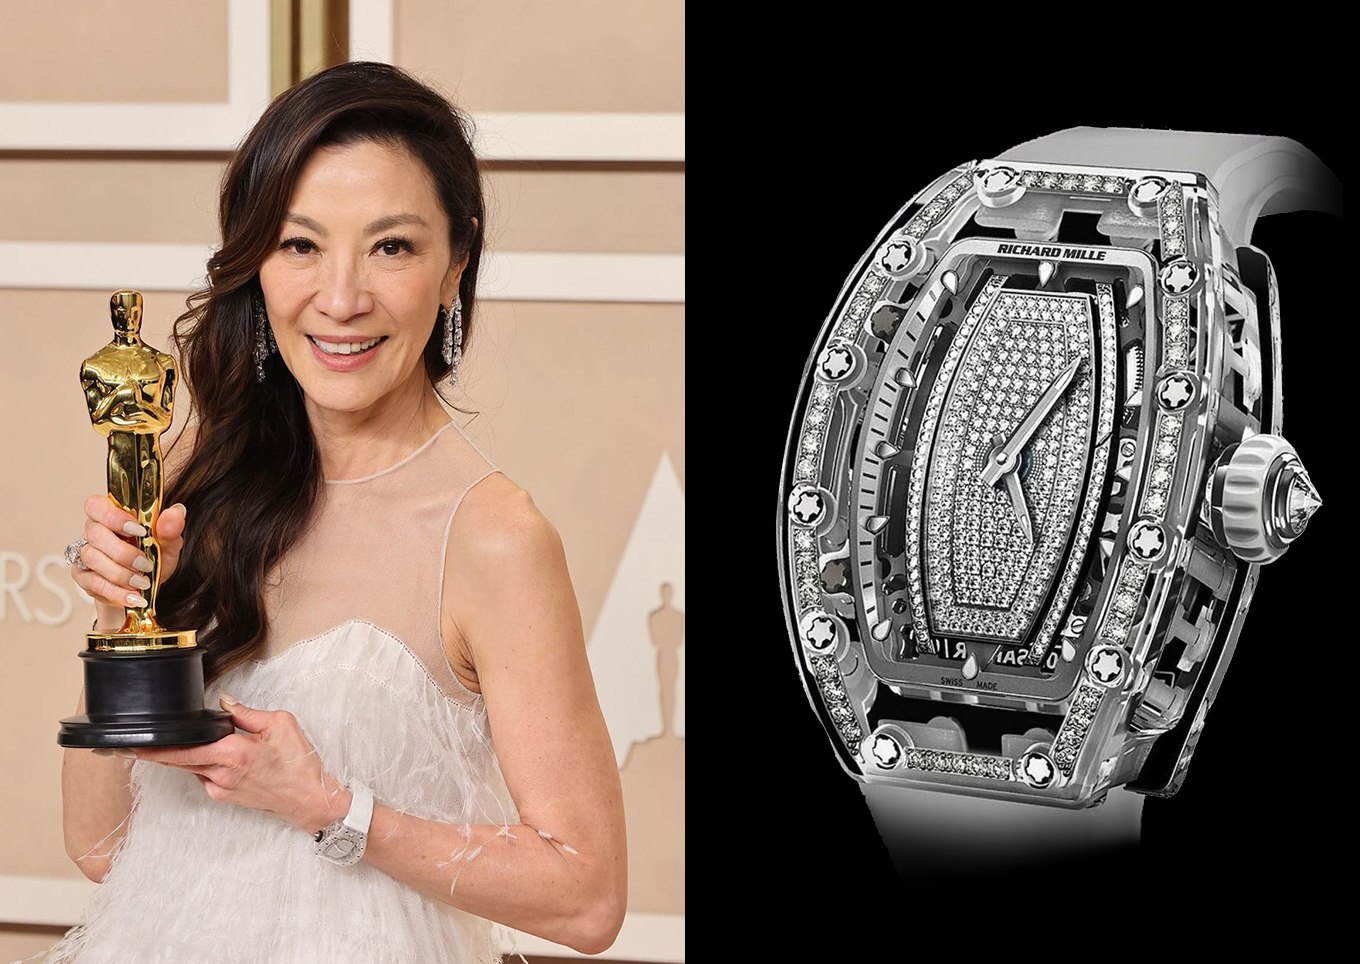 Michelle Yeoh wearing a Richard Mille watch at the Oscar 2023